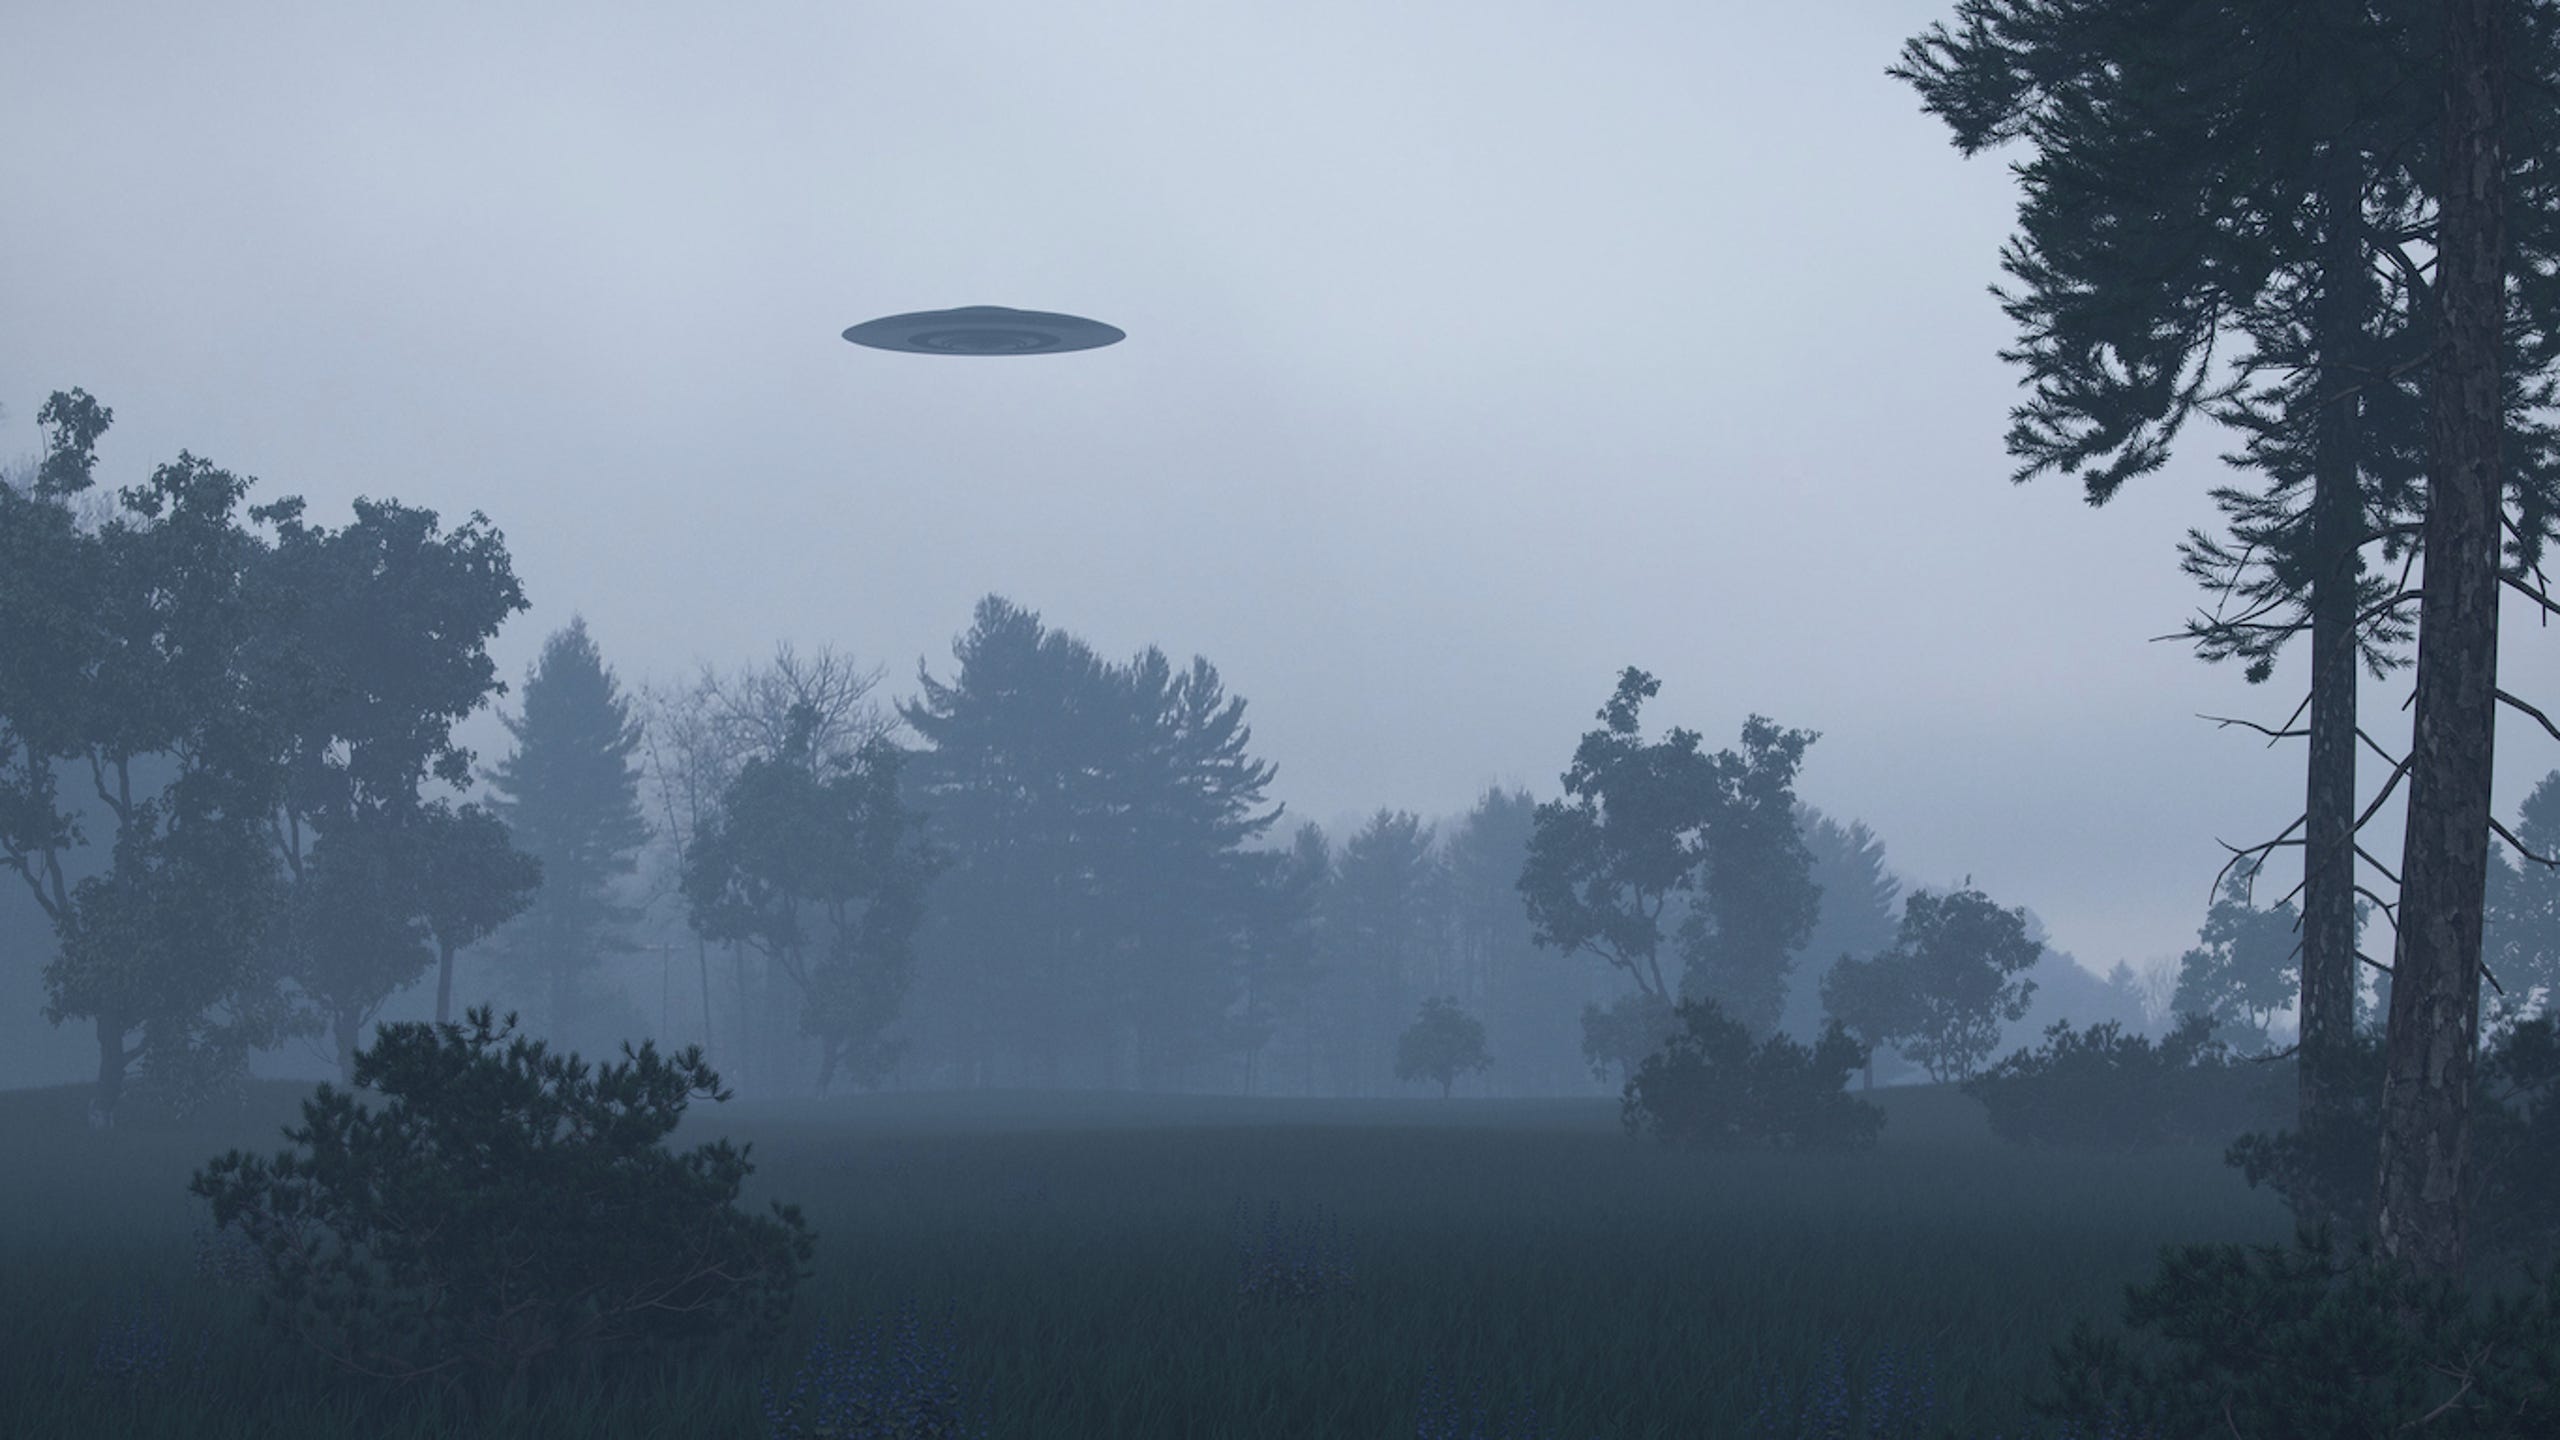 UFOs, or unidentified flying objects, have stirred our imagination for generations. Sightings of these alleged interstellar visitors to Earth have been chronicled throughout history. However, the mania for UFOs shifted into hyperdrive in 1947, when flying saucer enthusiasts believed the remains of an otherworldly spacecraft, and even the corpse of an alien, were discovered in […]